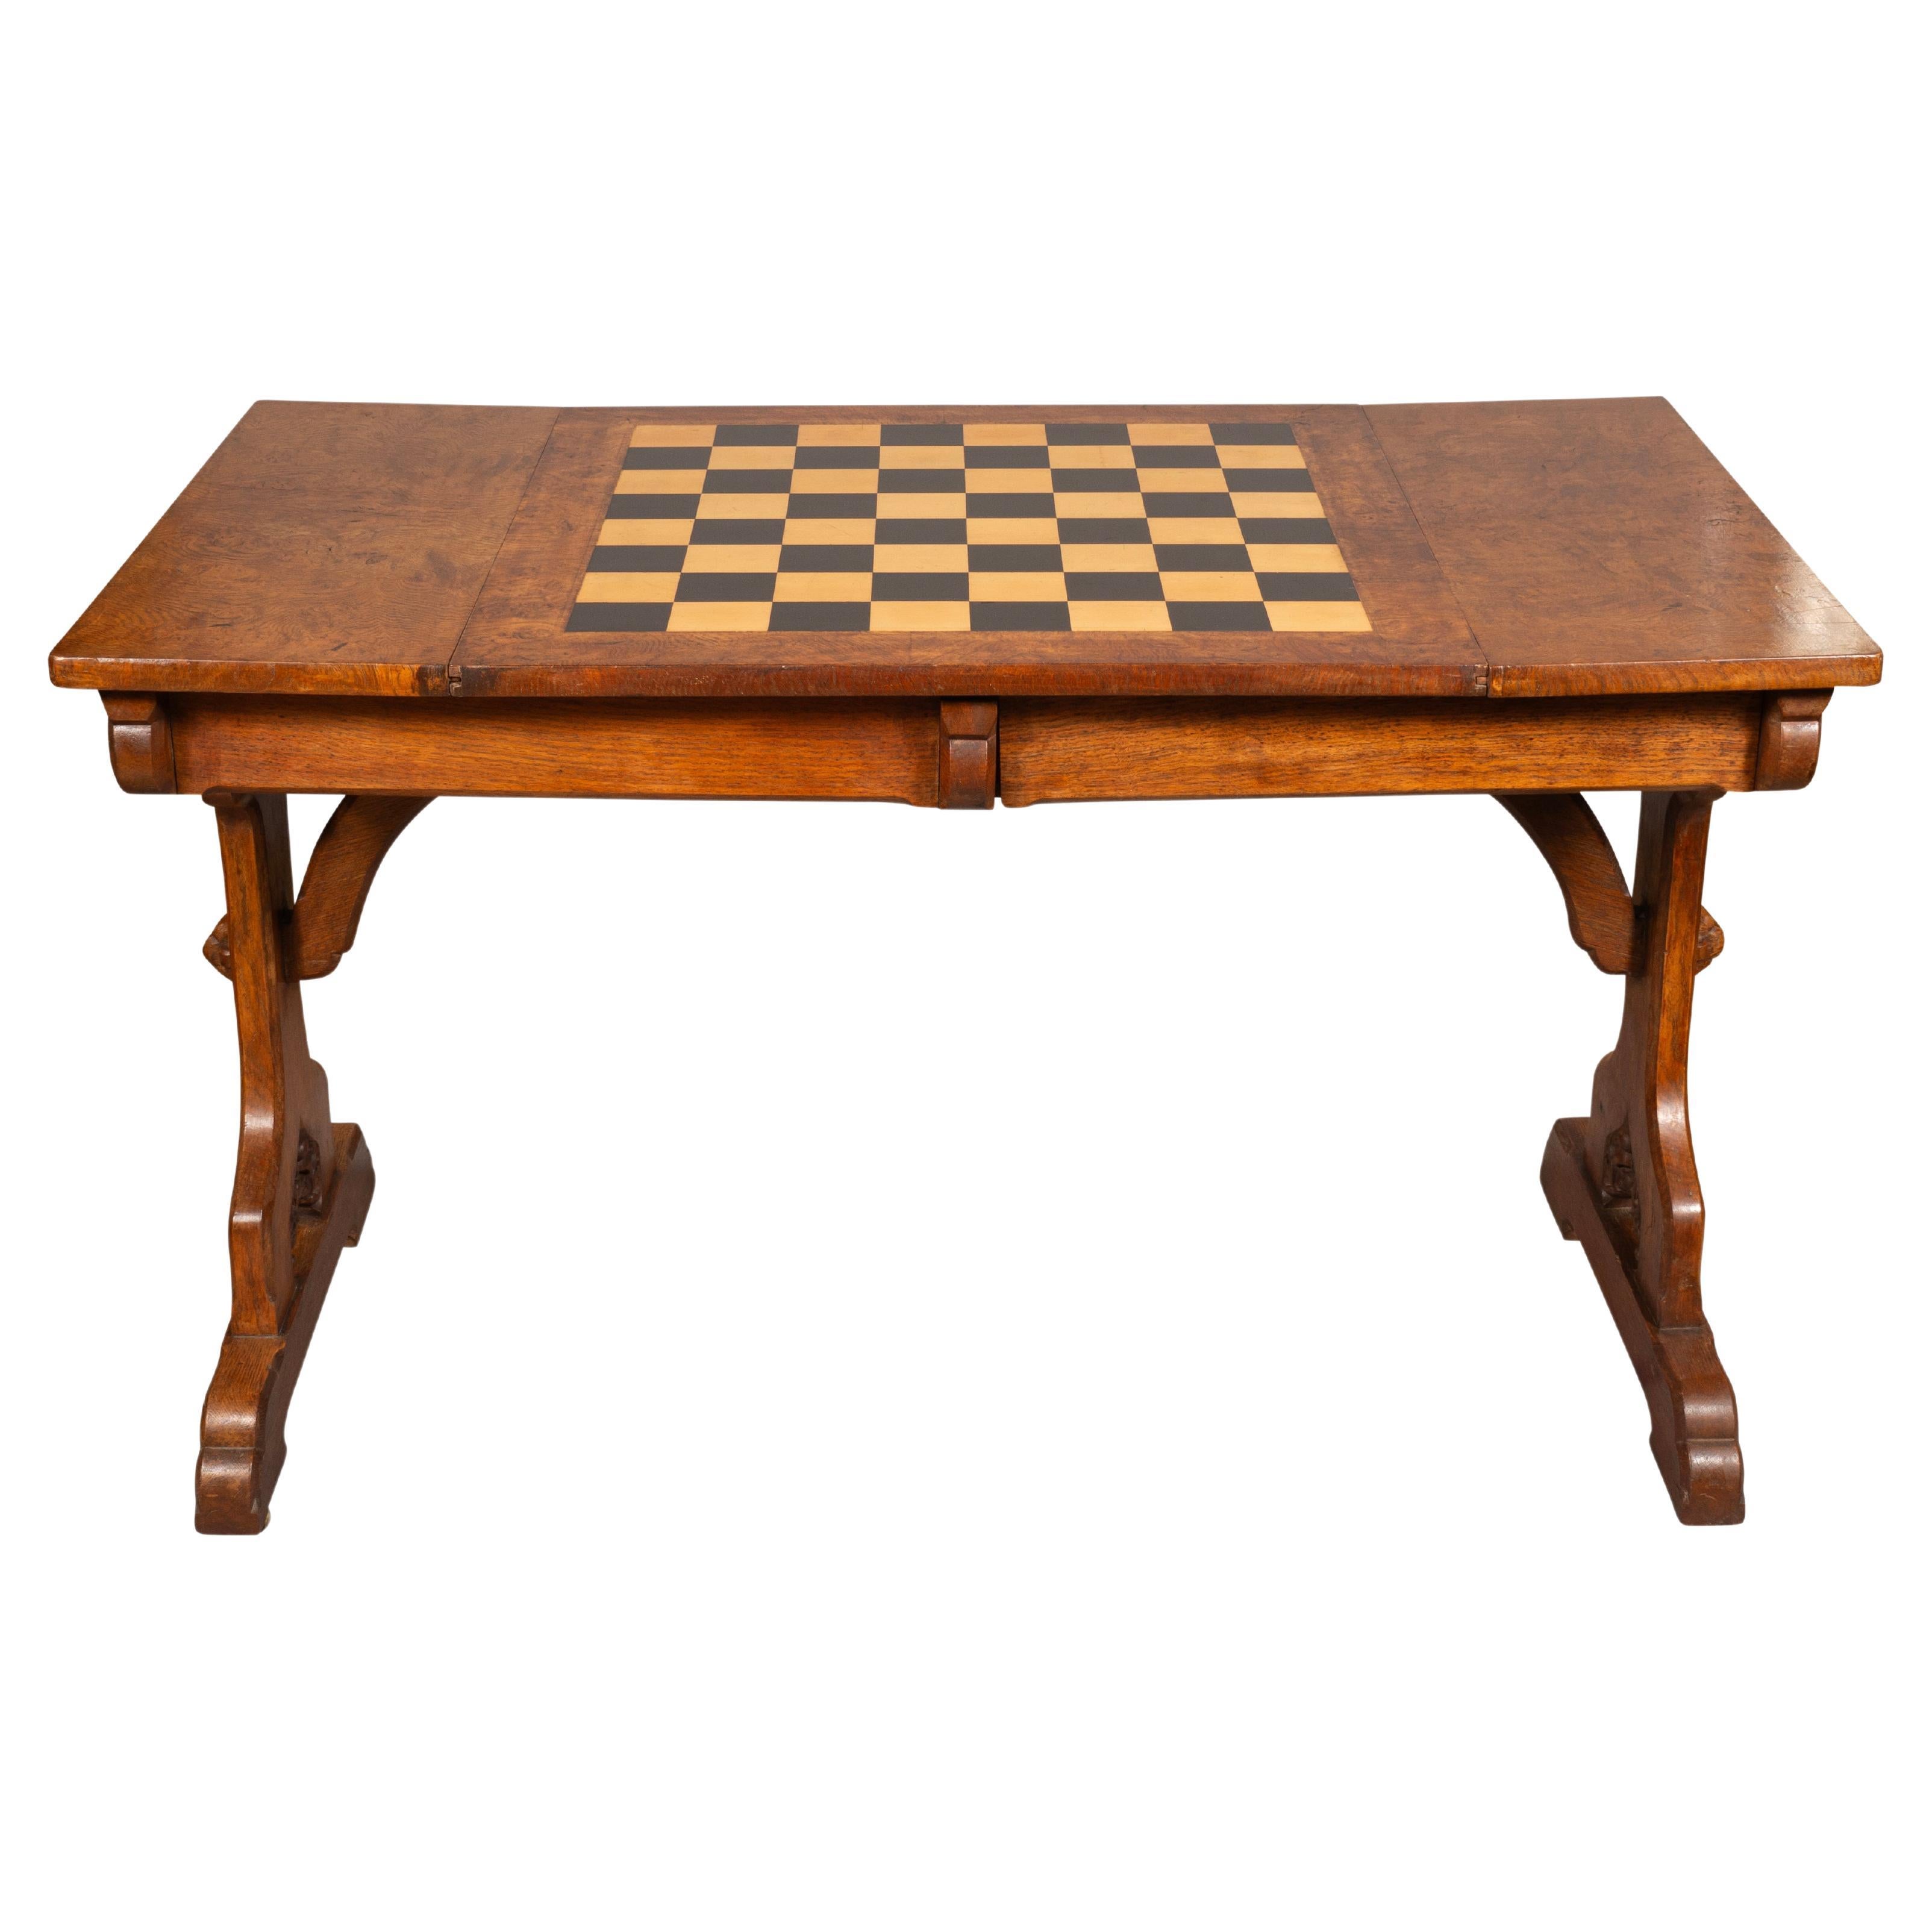 Victorian Gothic Revival Pollard Oak Games Table Attributed To Pugin